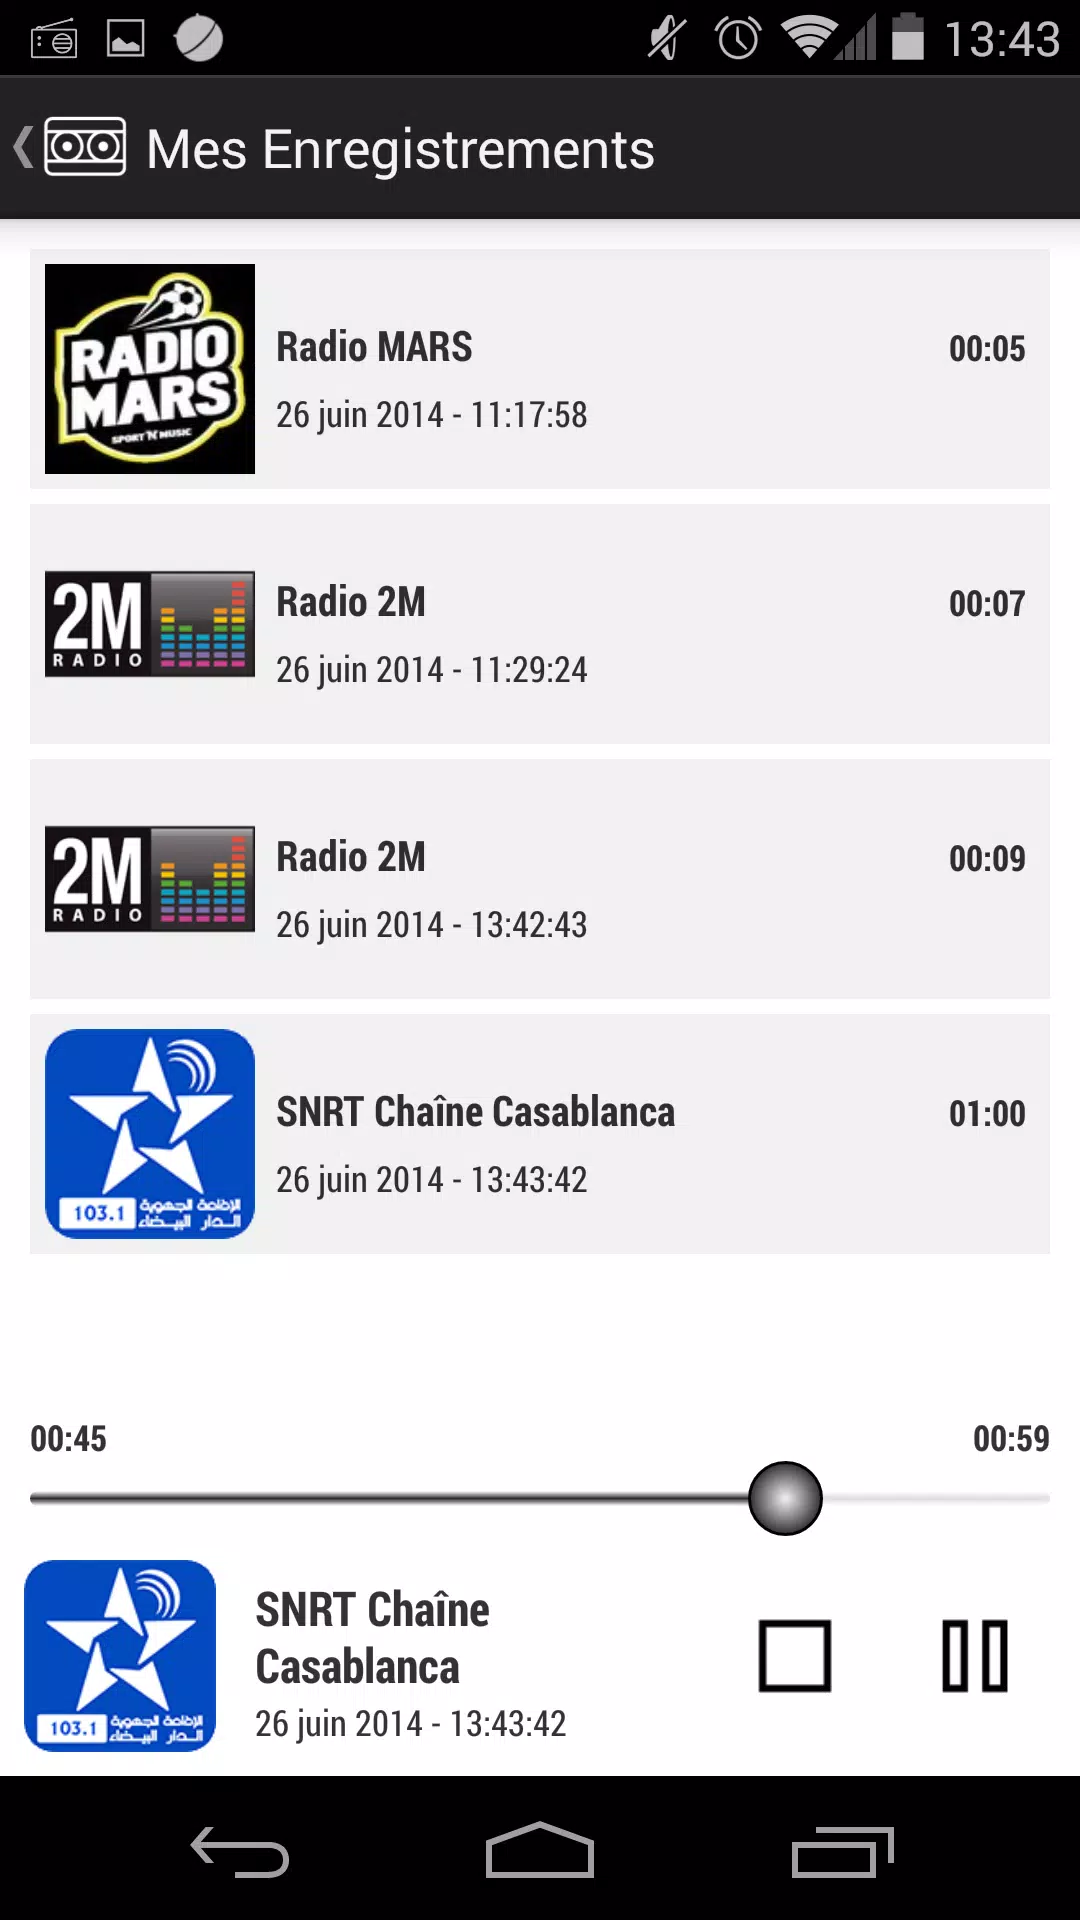 RADIO MAROC PRO APK for Android Download